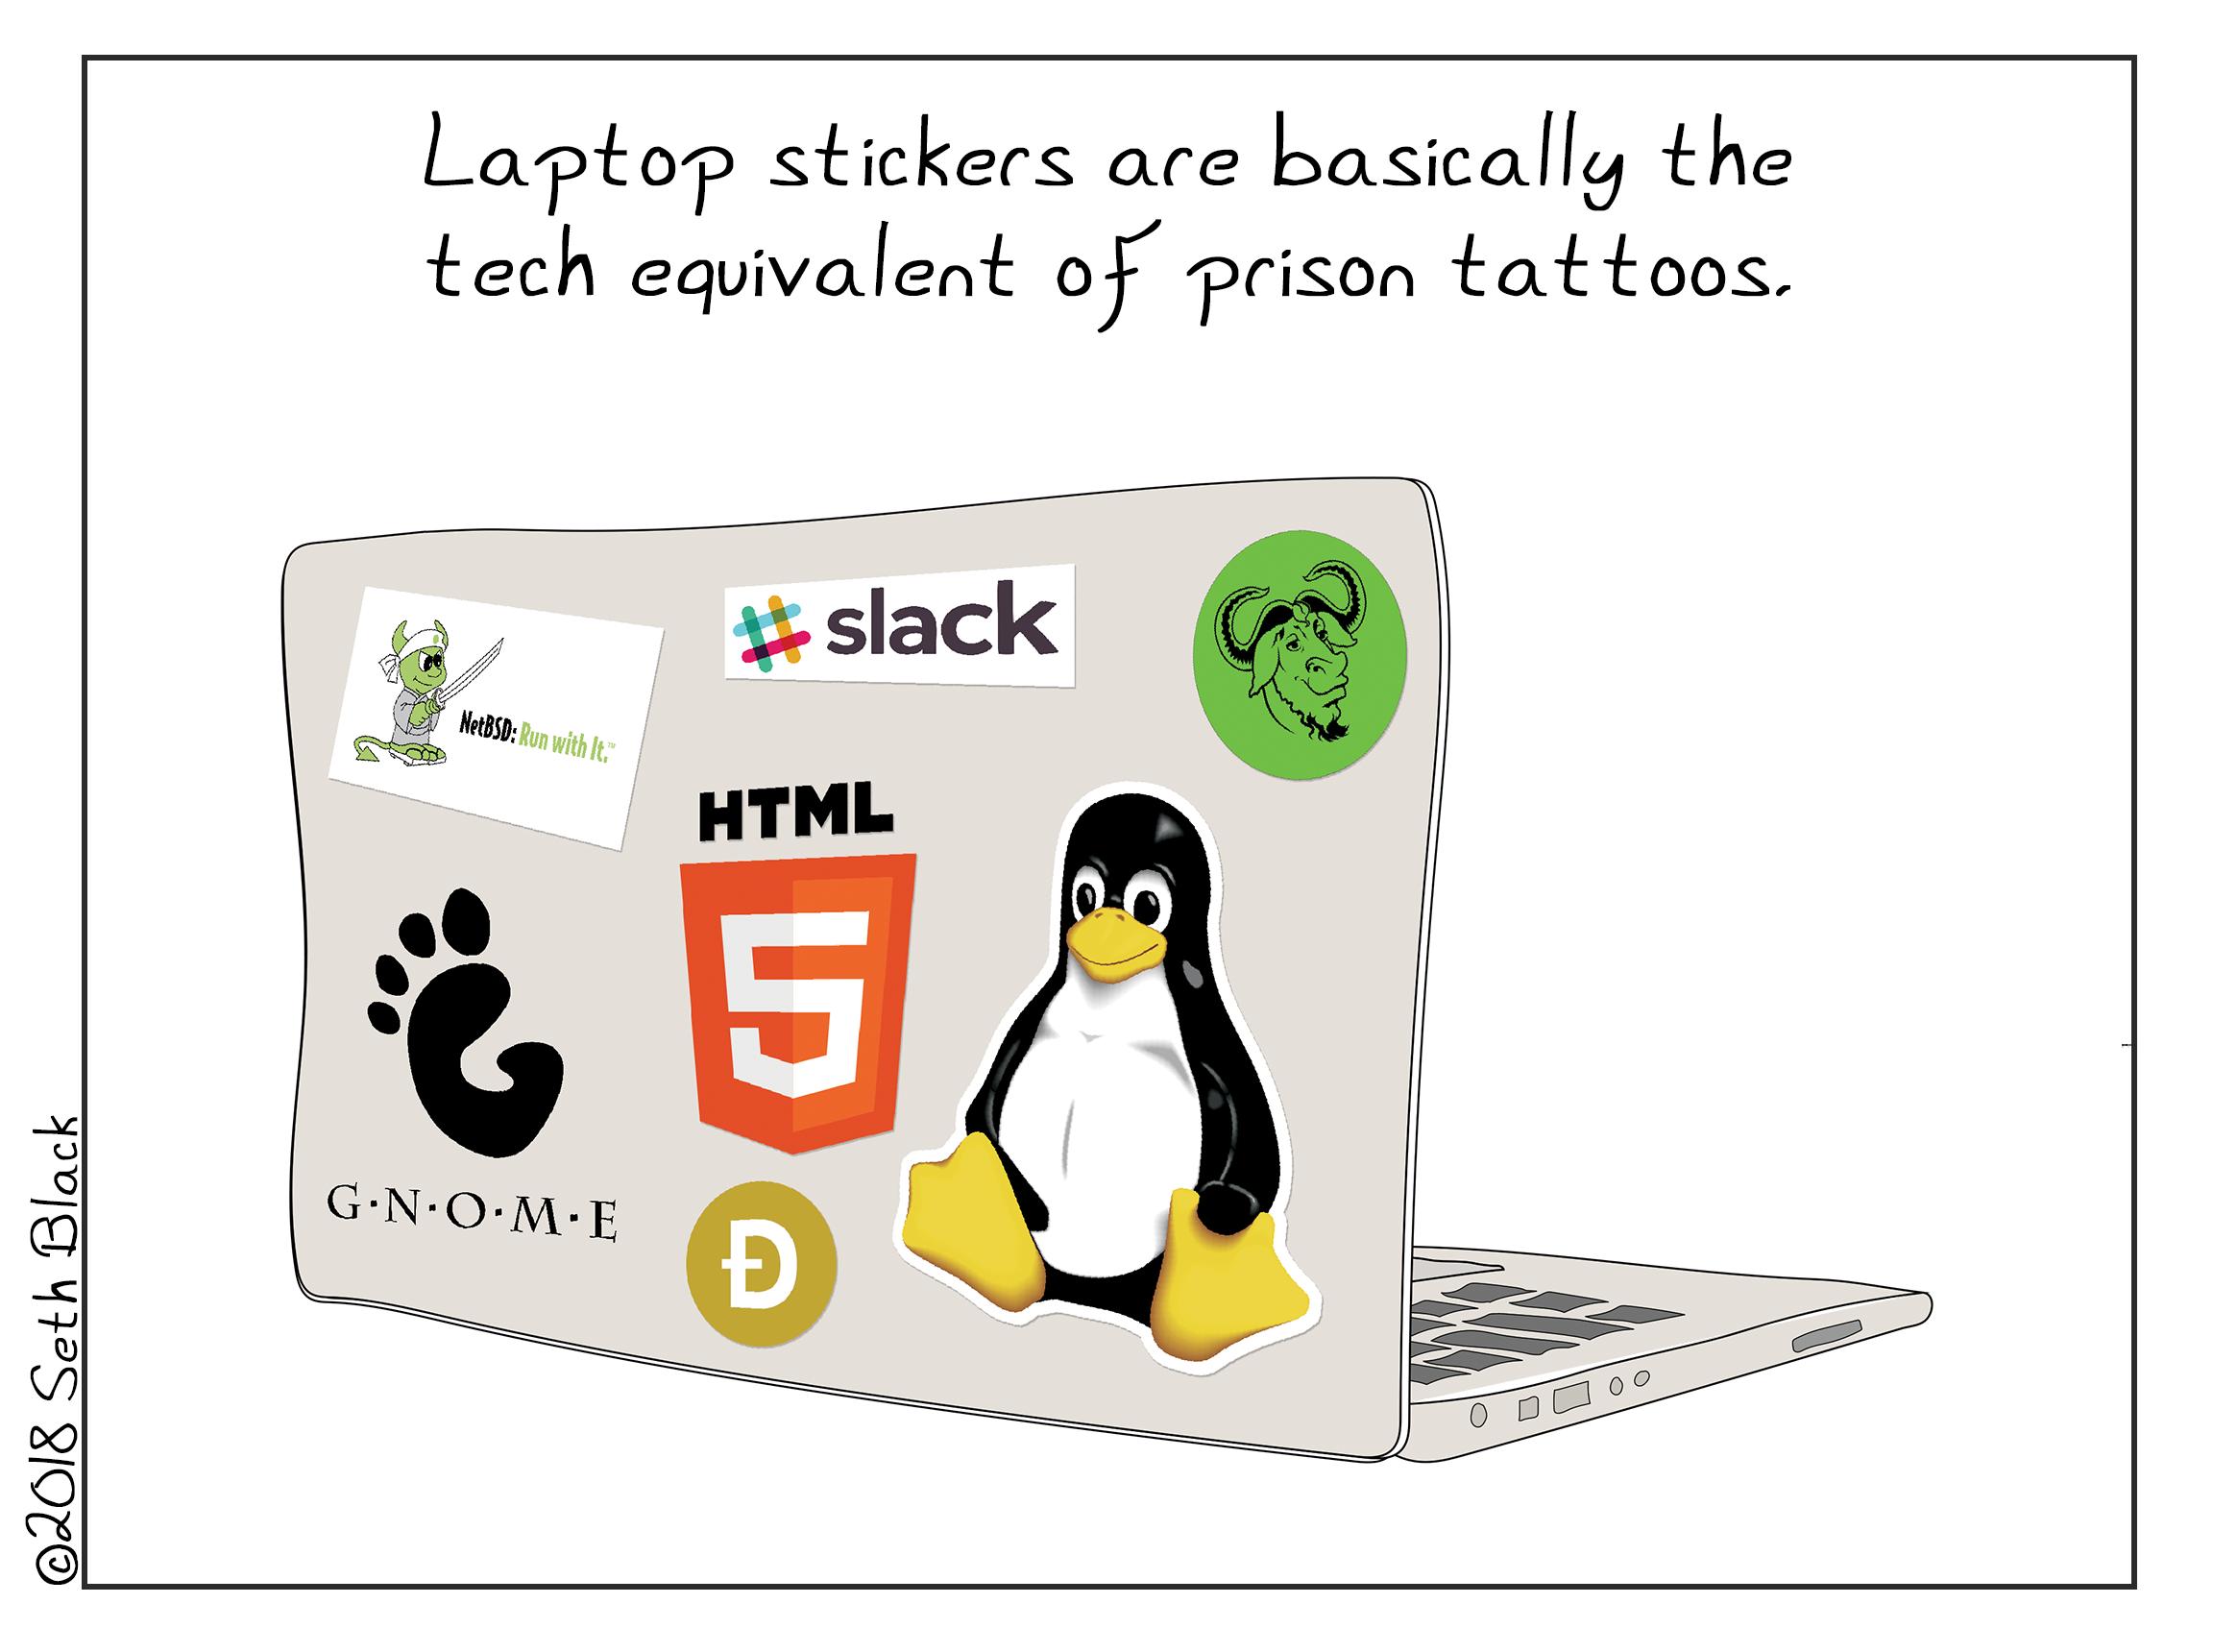 A laptop covered with technology themed stickers with the caption, "Laptop stickers are basically the tech equivalent of prison tattoos."